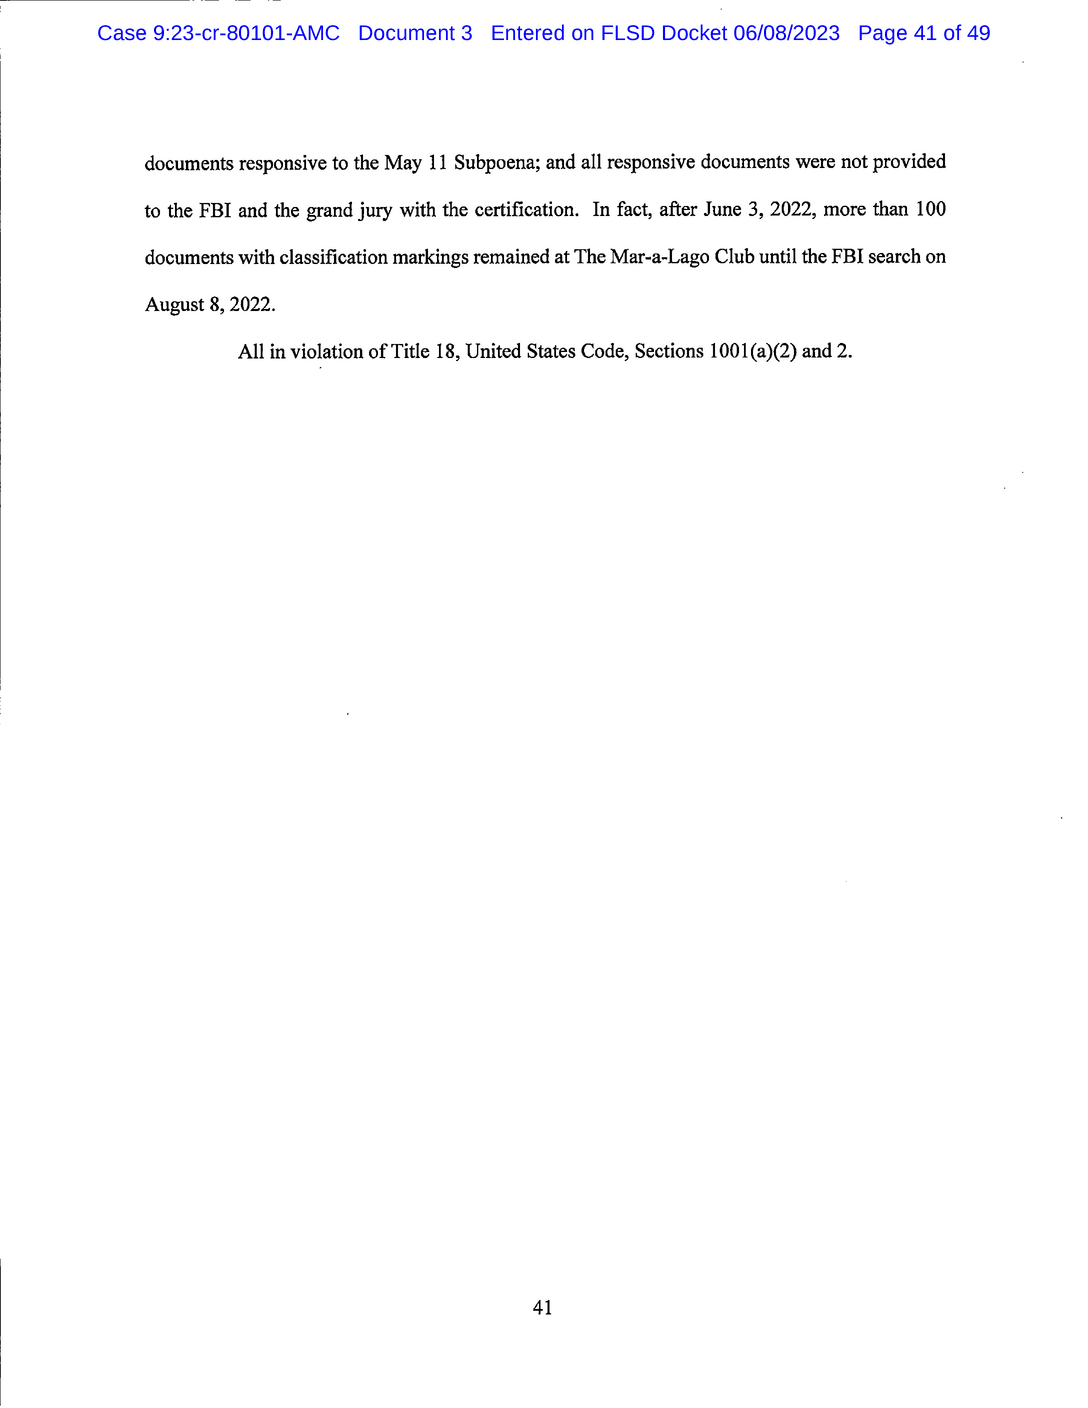 Page 41 of Donald Trump Classified Documents Indictment PDF document.